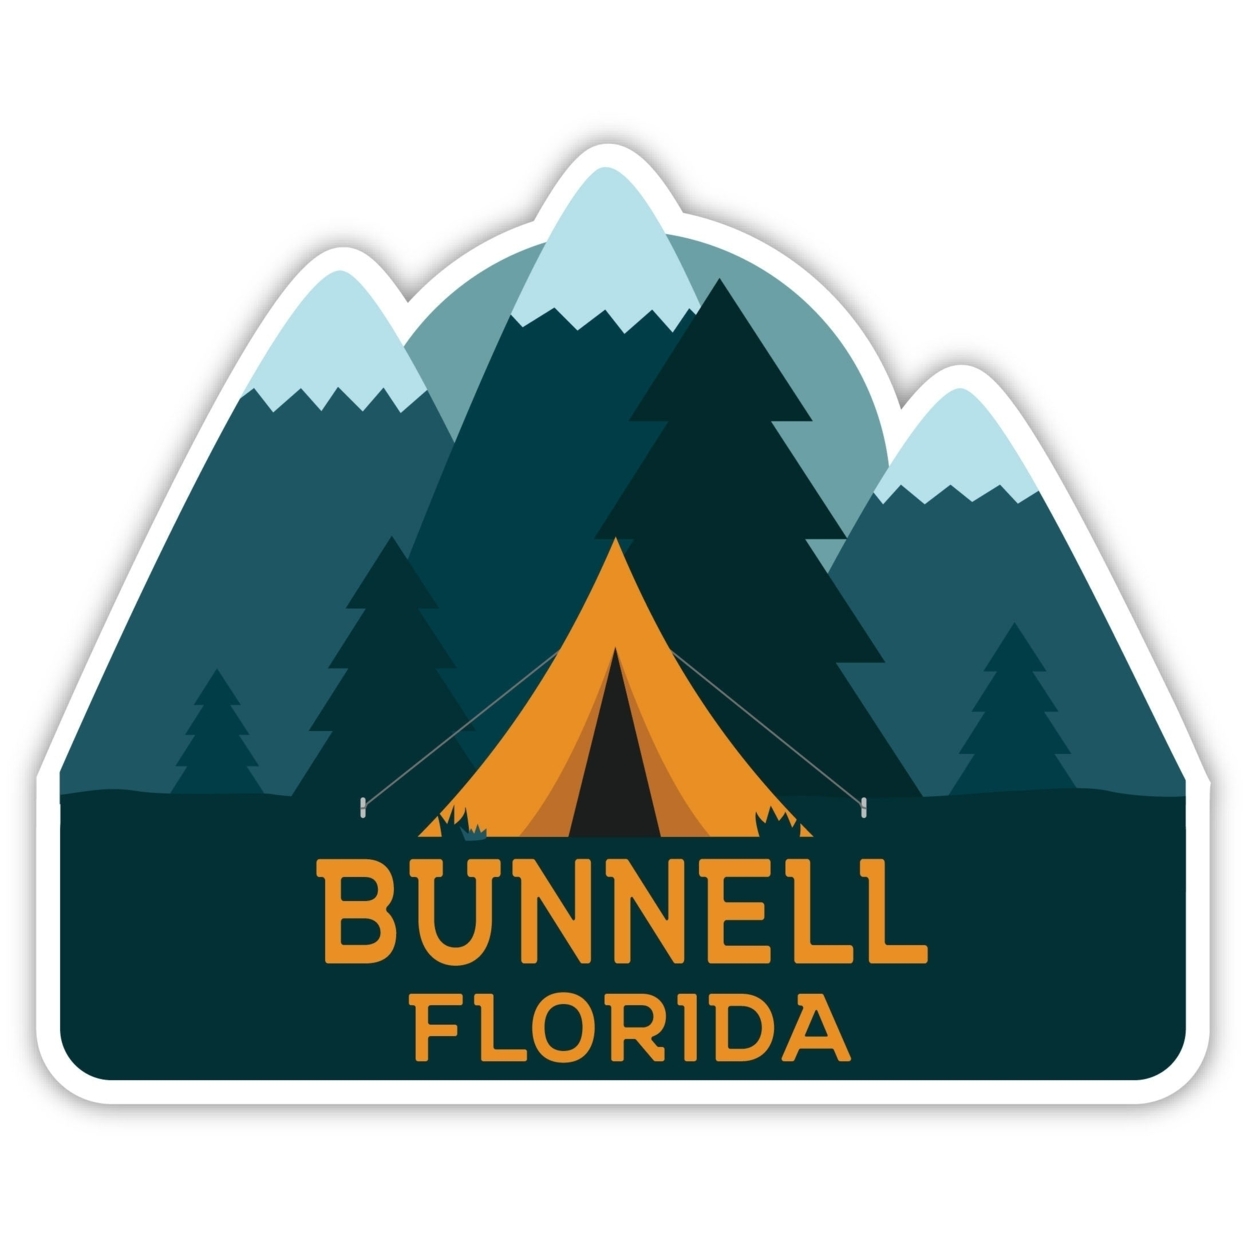 Bunnell Florida Souvenir Decorative Stickers (Choose Theme And Size) - 4-Pack, 4-Inch, Tent